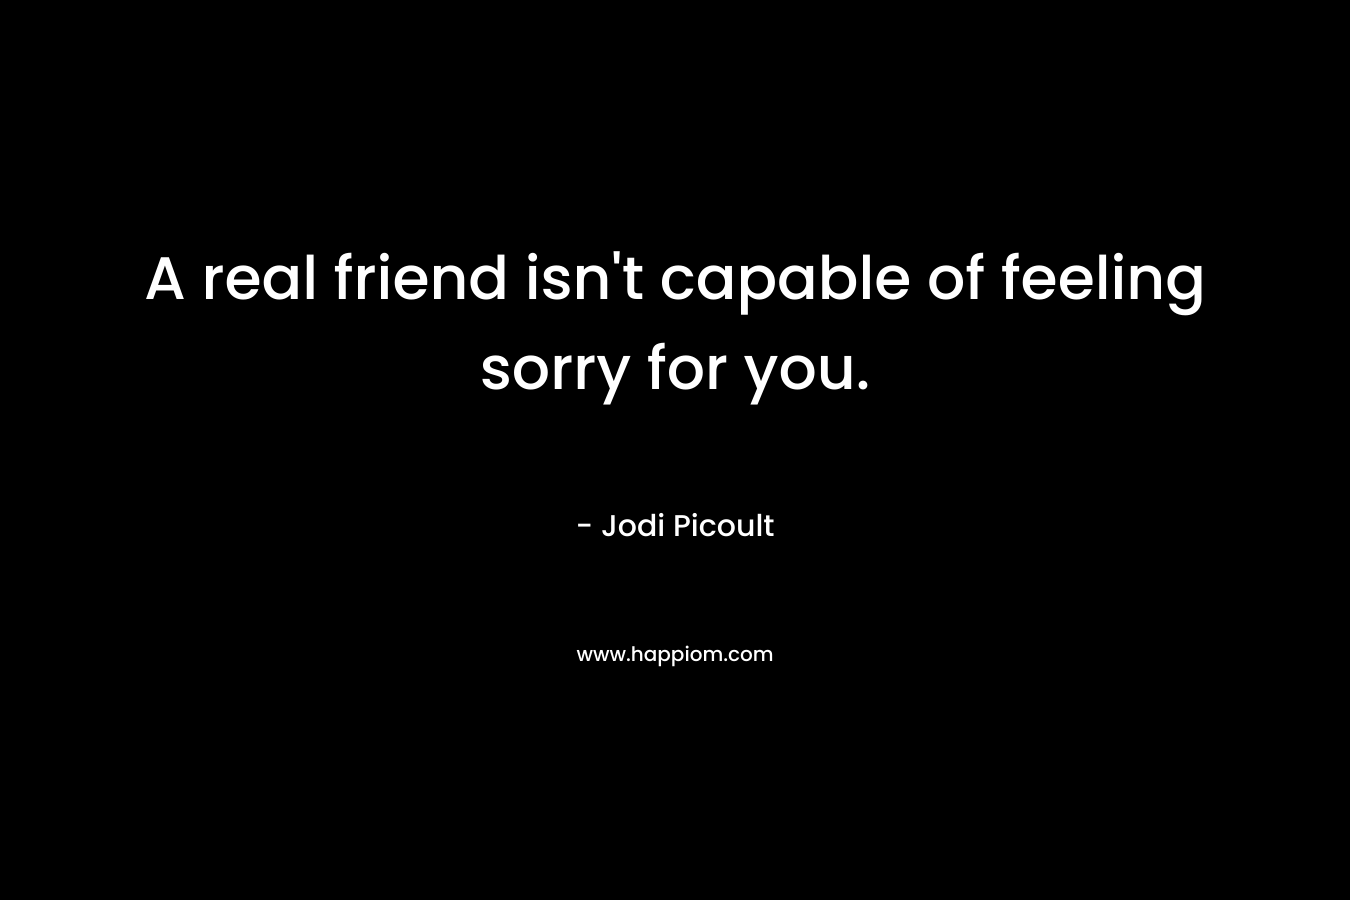 A real friend isn't capable of feeling sorry for you.